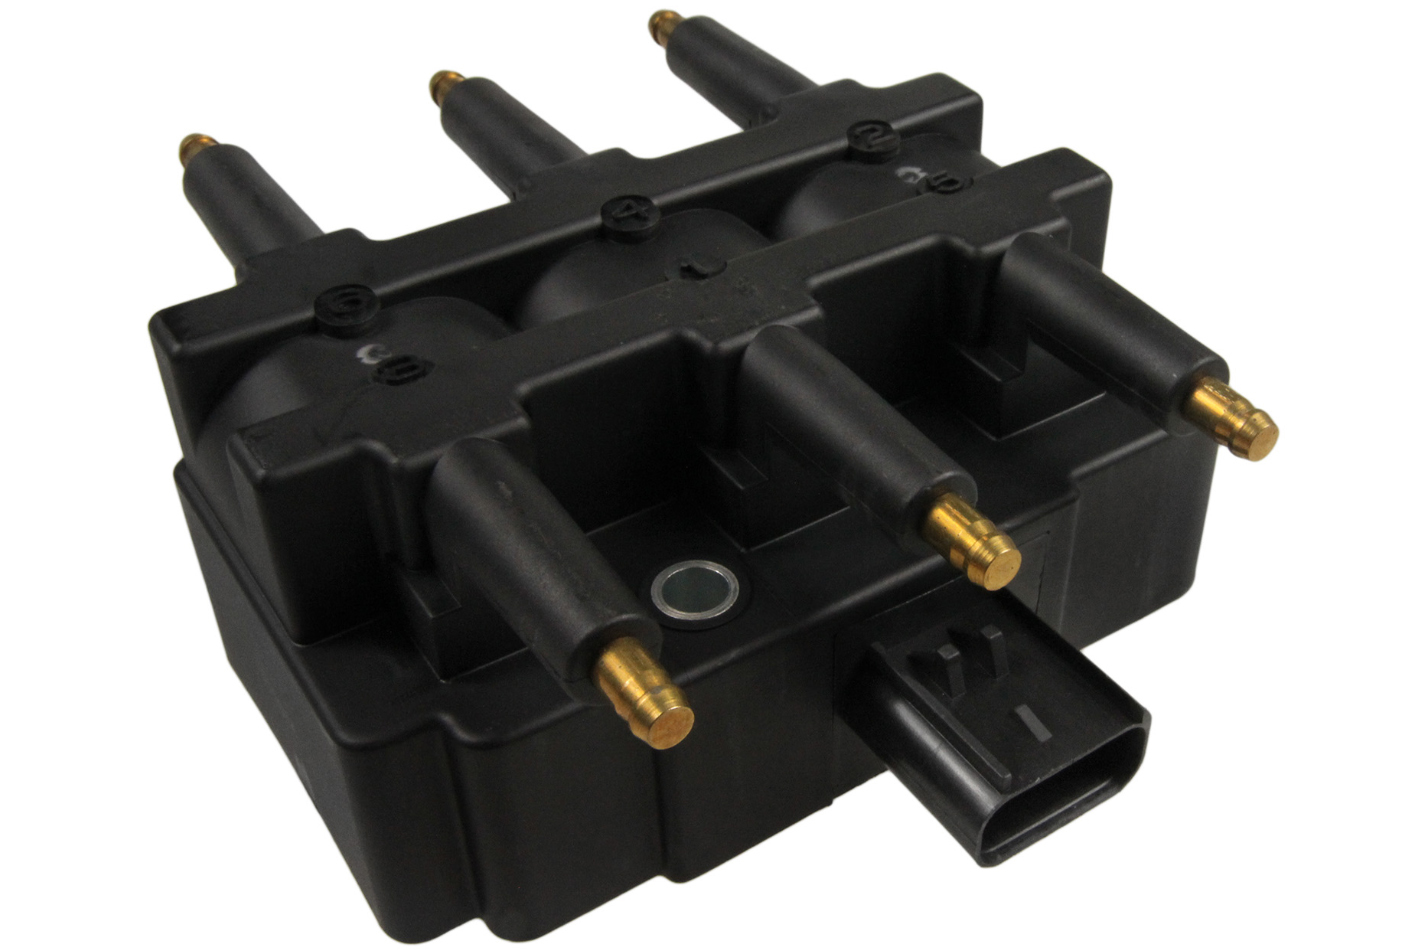 NGK U2057 Ignition Coil, Male HEI Style, Coil Pack, OE Specs, Black, Each